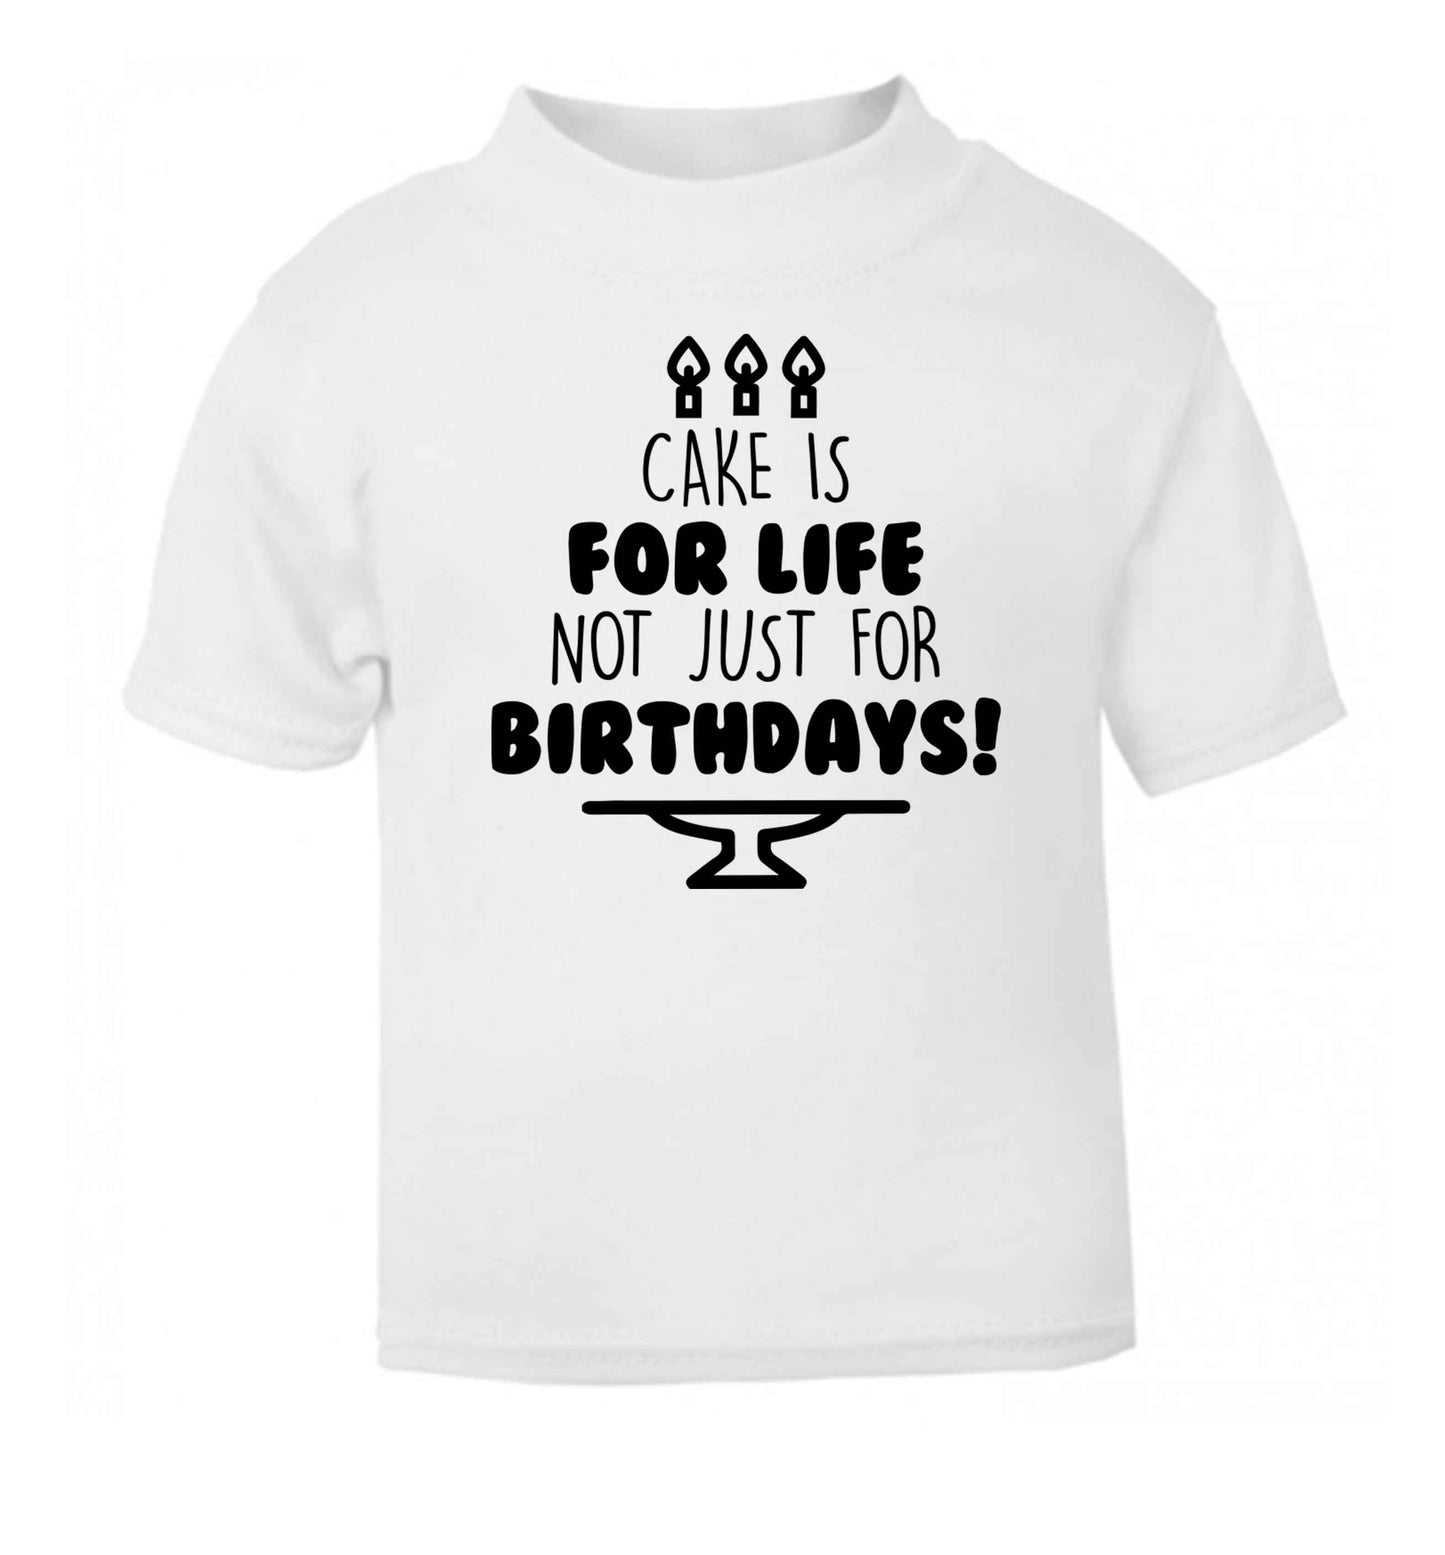 Cake is for life not just for birthdays white Baby Toddler Tshirt 2 Years